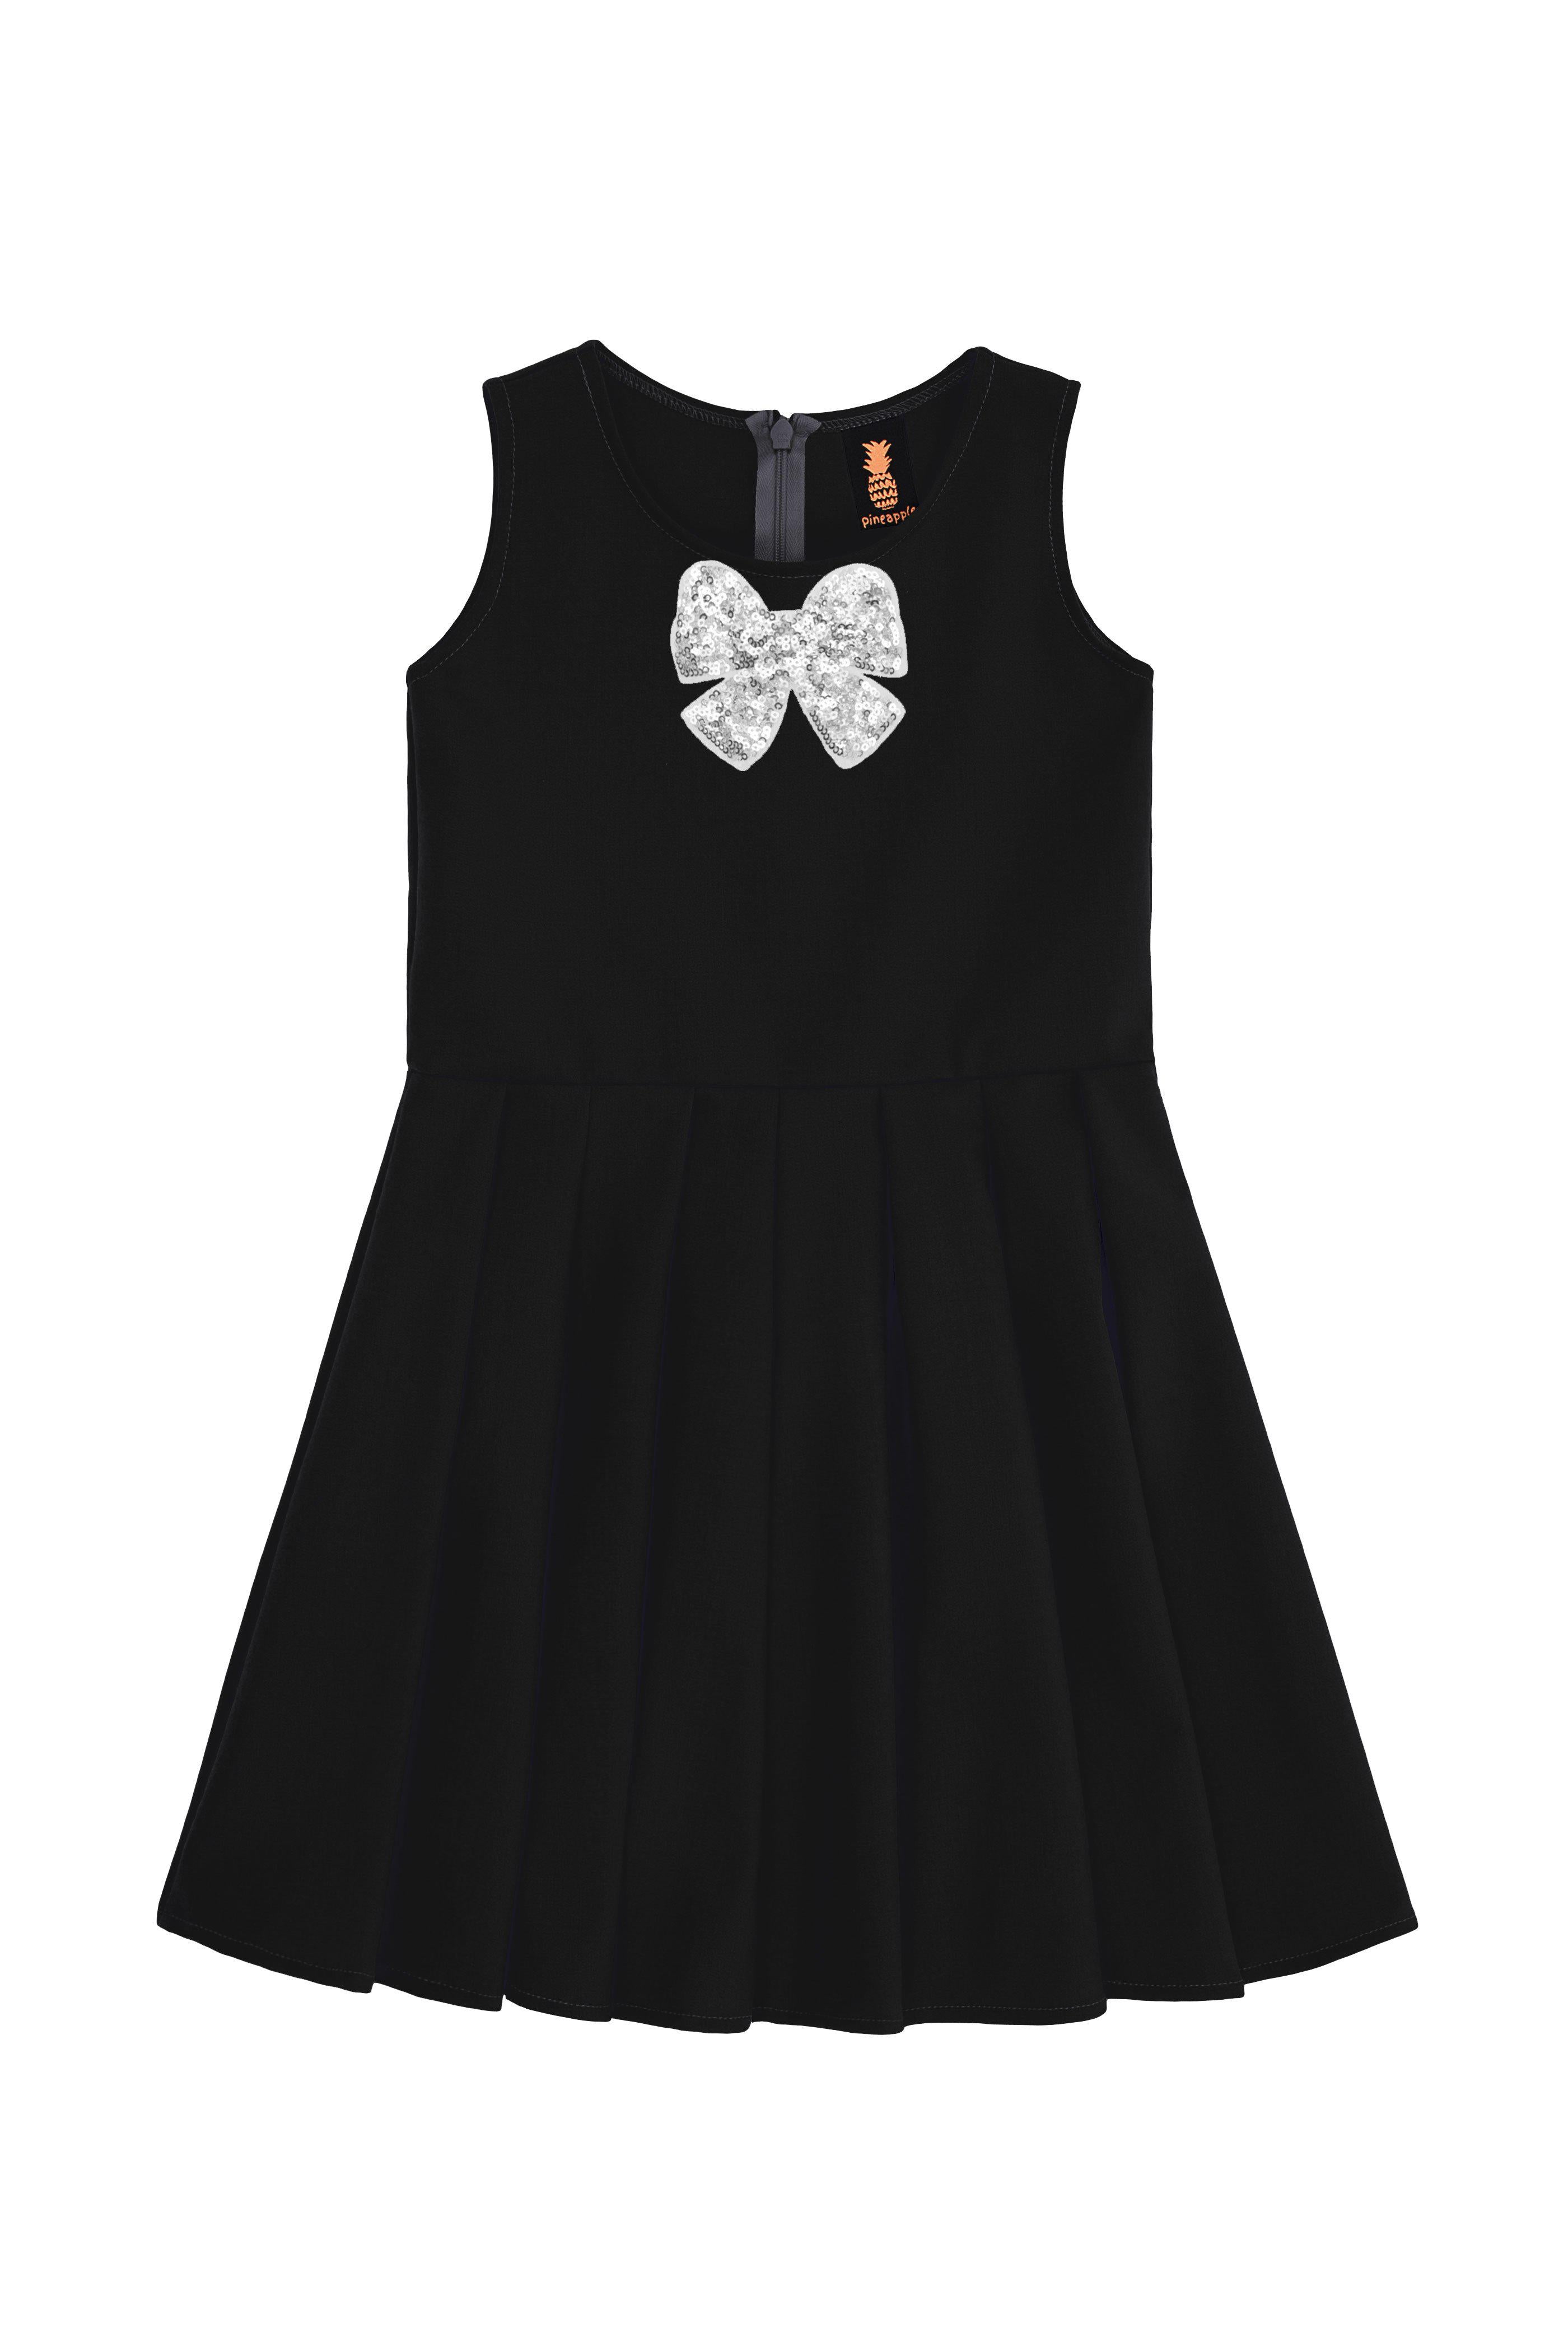 Black Fancy Fit & Flare Skater Christmas Party Dress - Girls - Pineapple Clothing